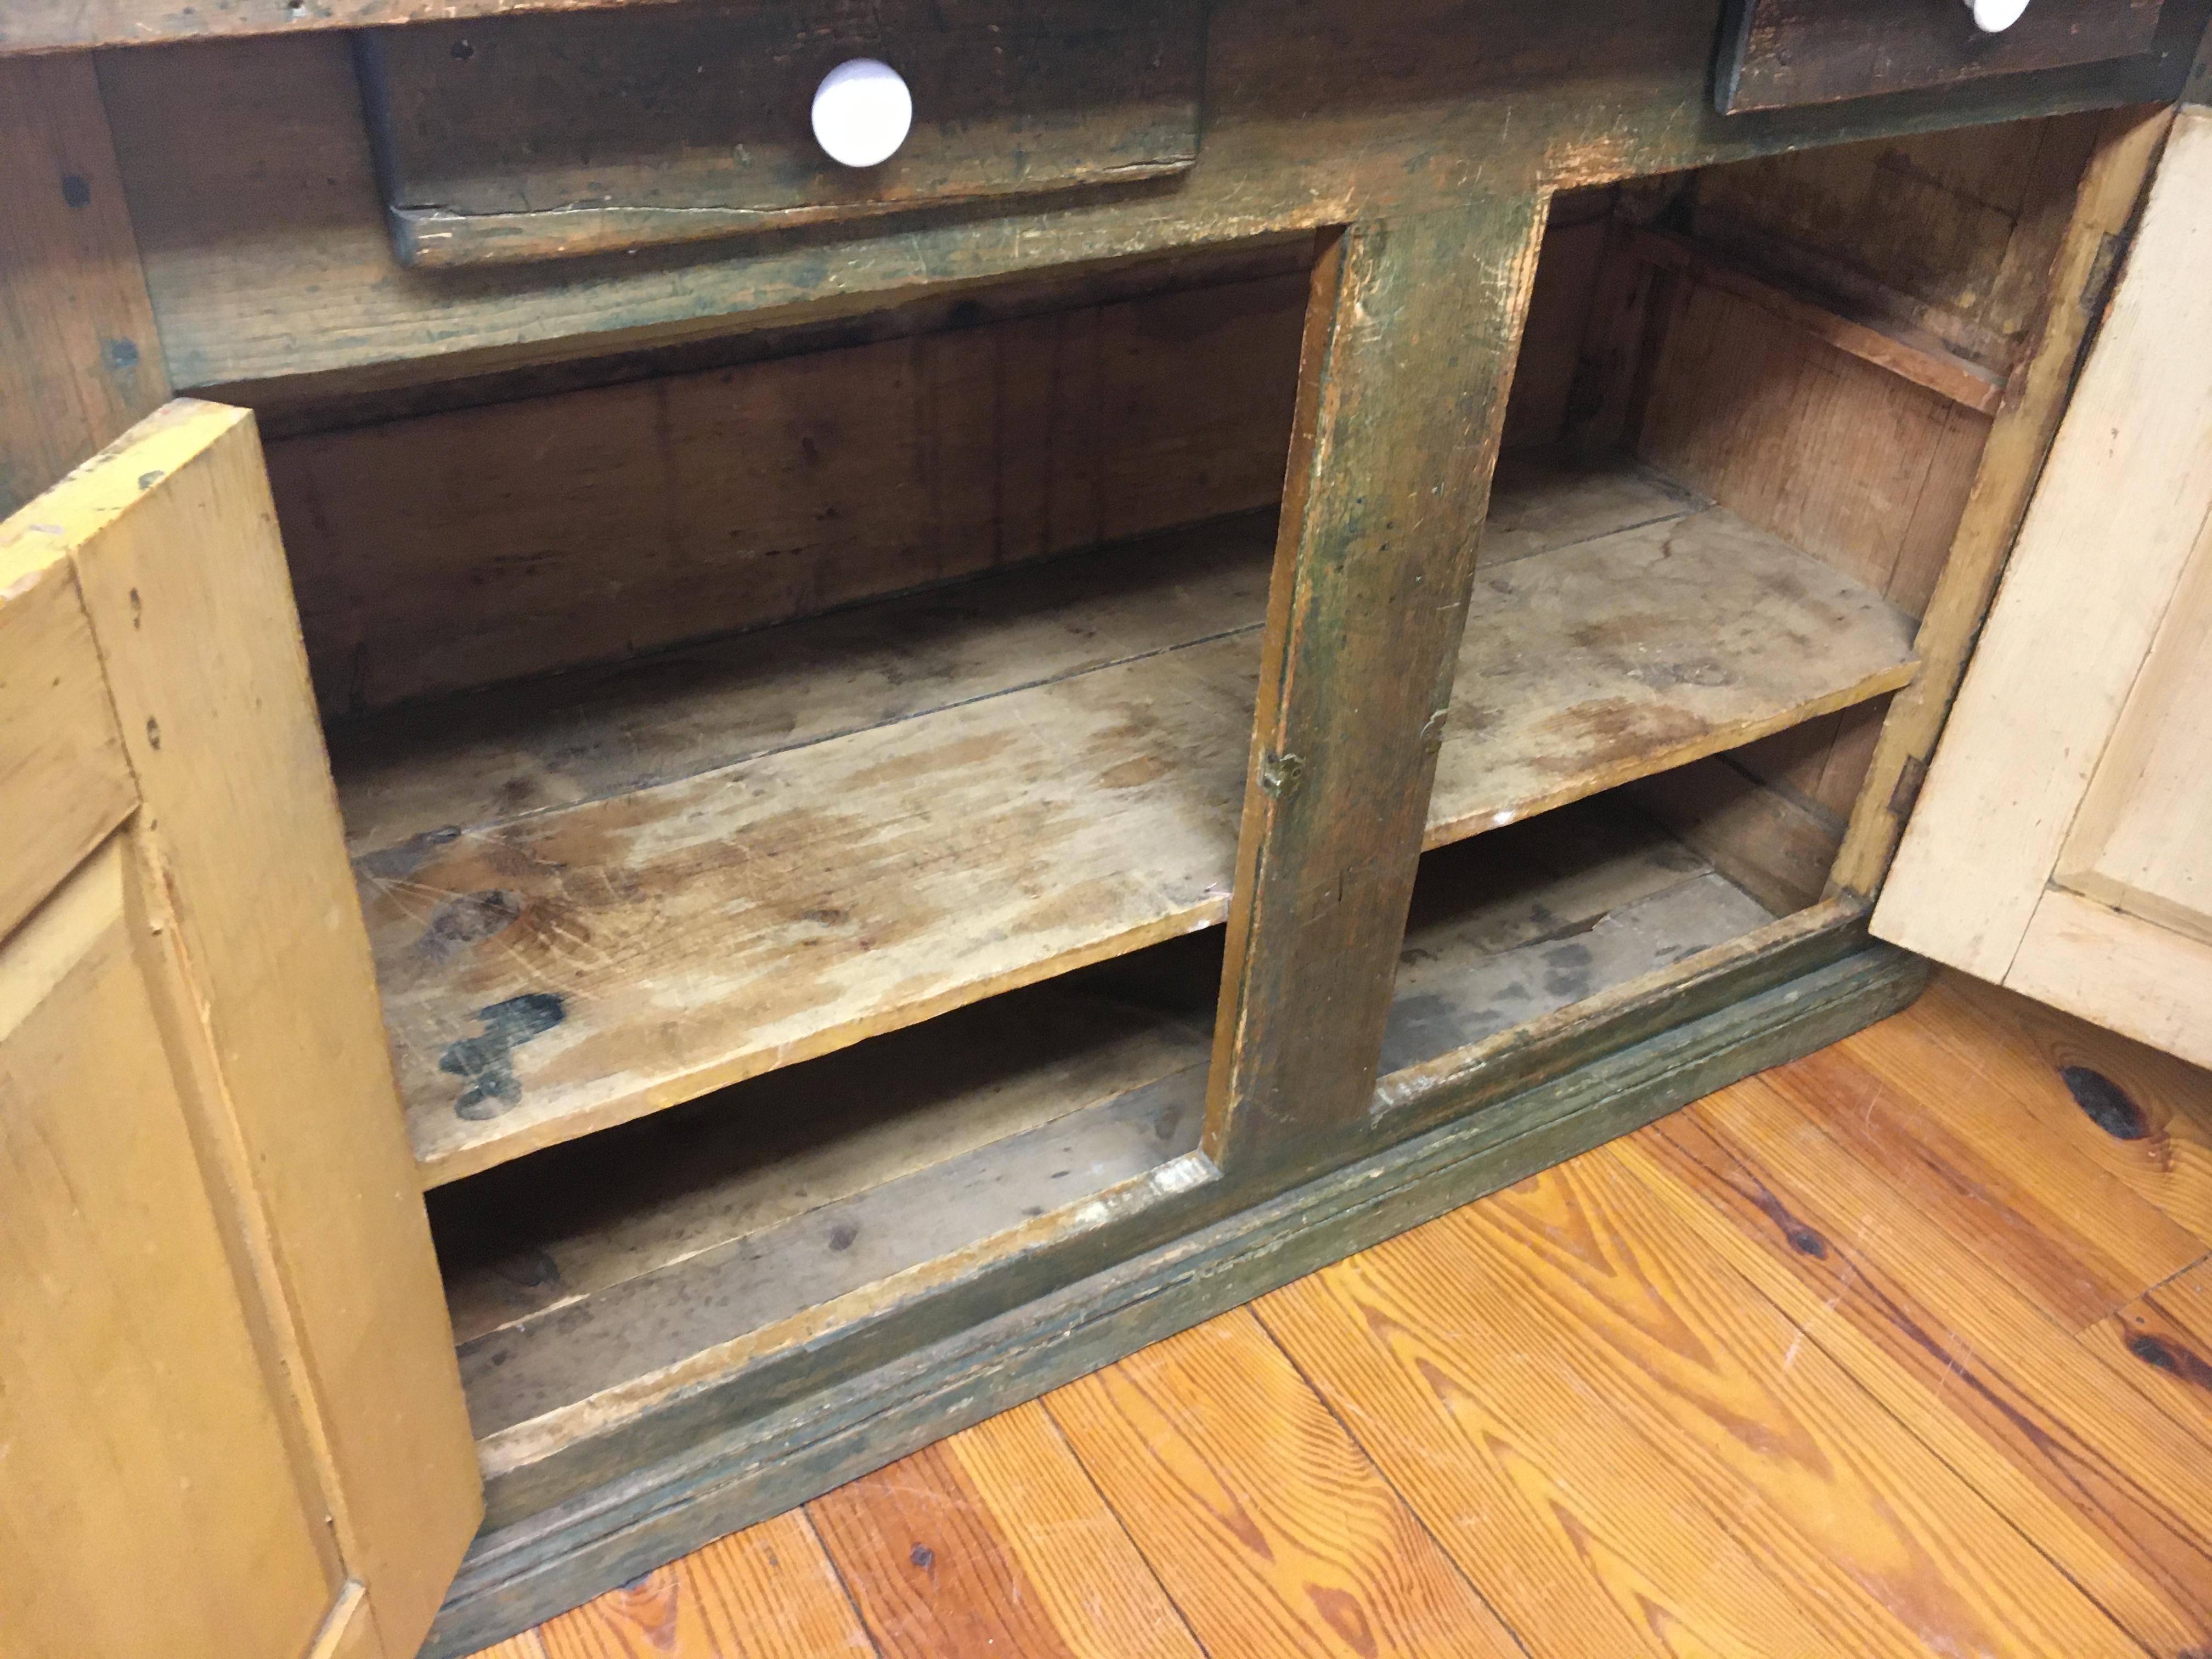 This two door, two drawer soft green buffet has porcelain hardware and shelves inside. the moss green color is special like almost all Canadian painted pieces. This would work in any room in your home.